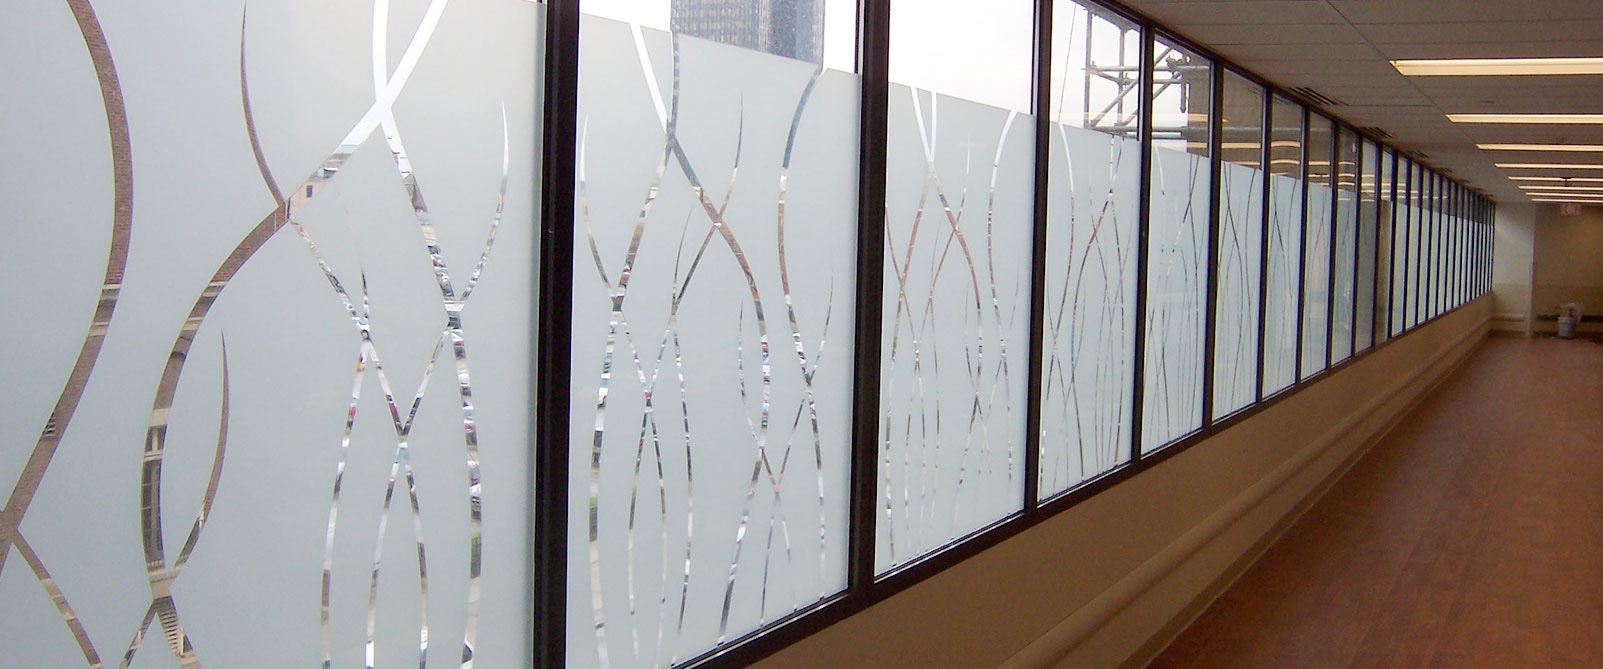 Etched Glass Vinyl - Frosted Vinyl - Privacy Window Film - Decorative  Window Film - 3M FASARA Glass Finishes